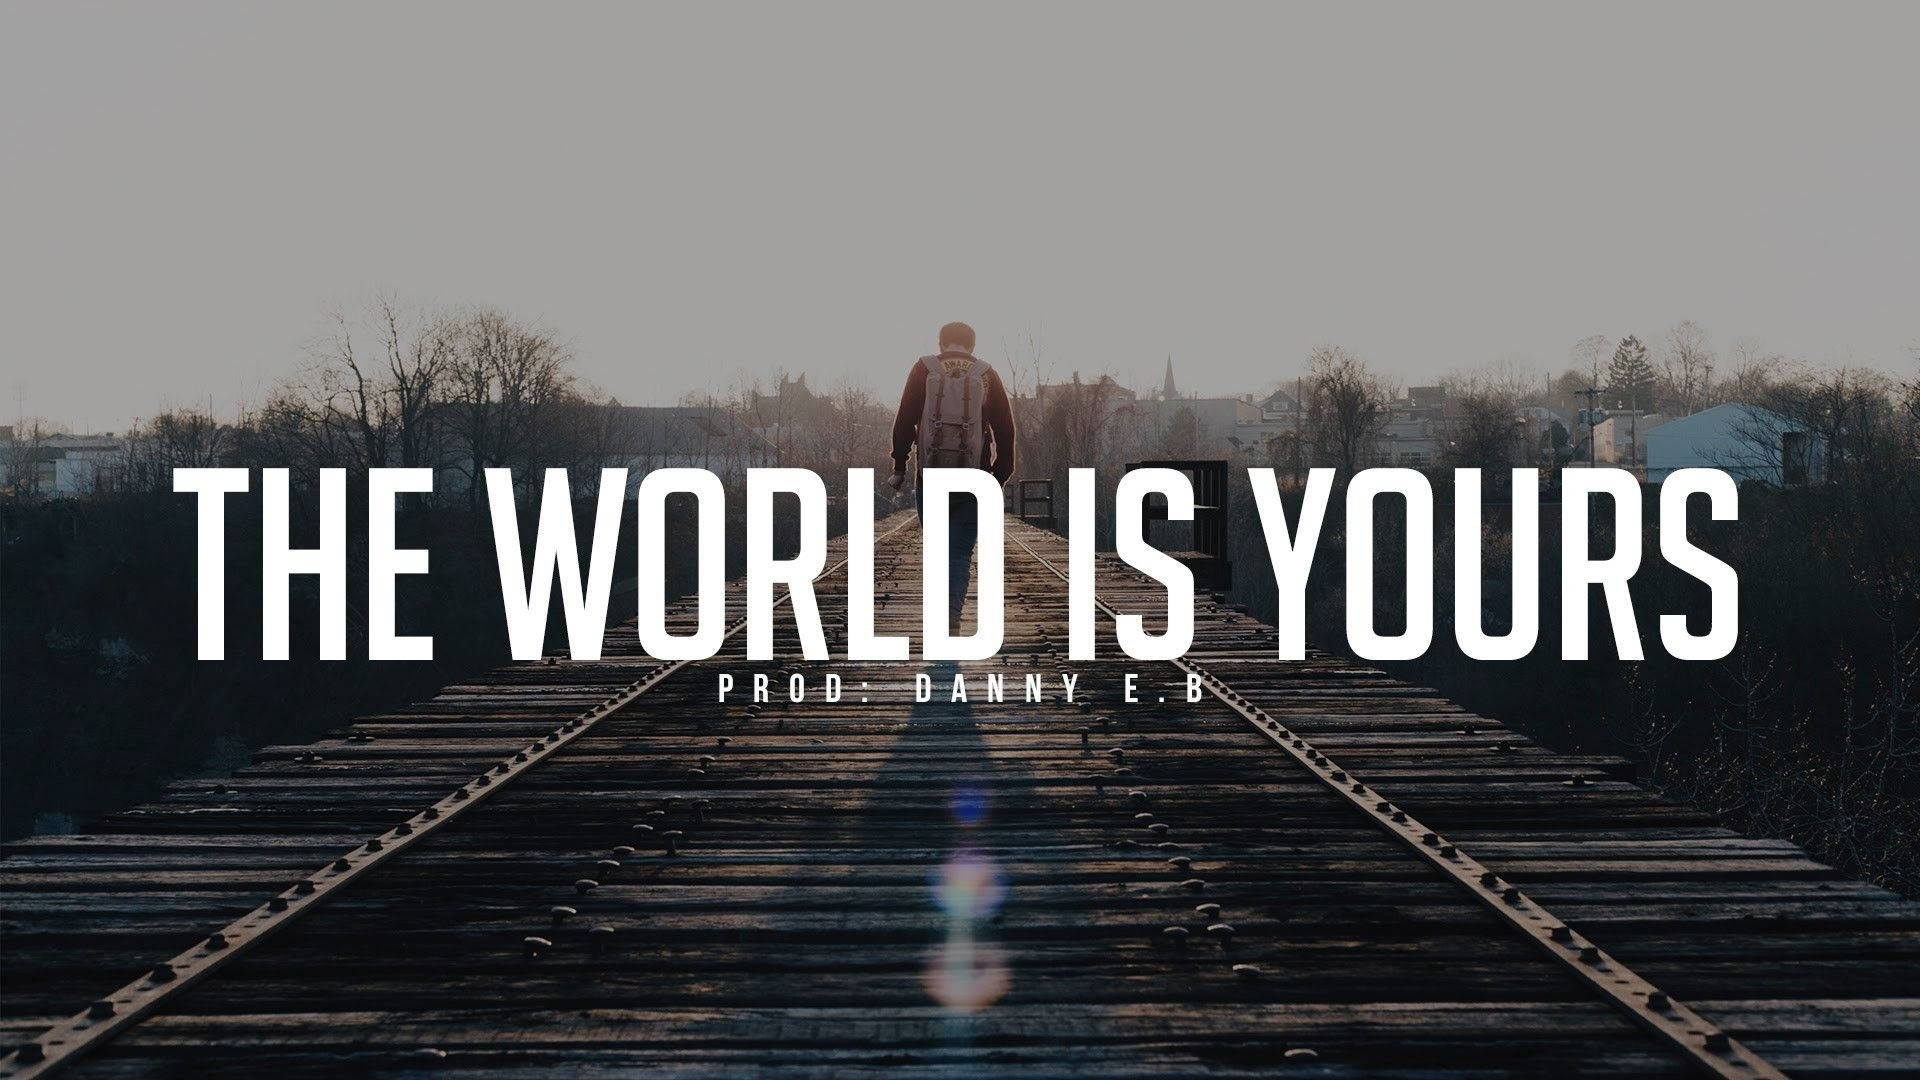 100+] The World Is Yours Wallpapers